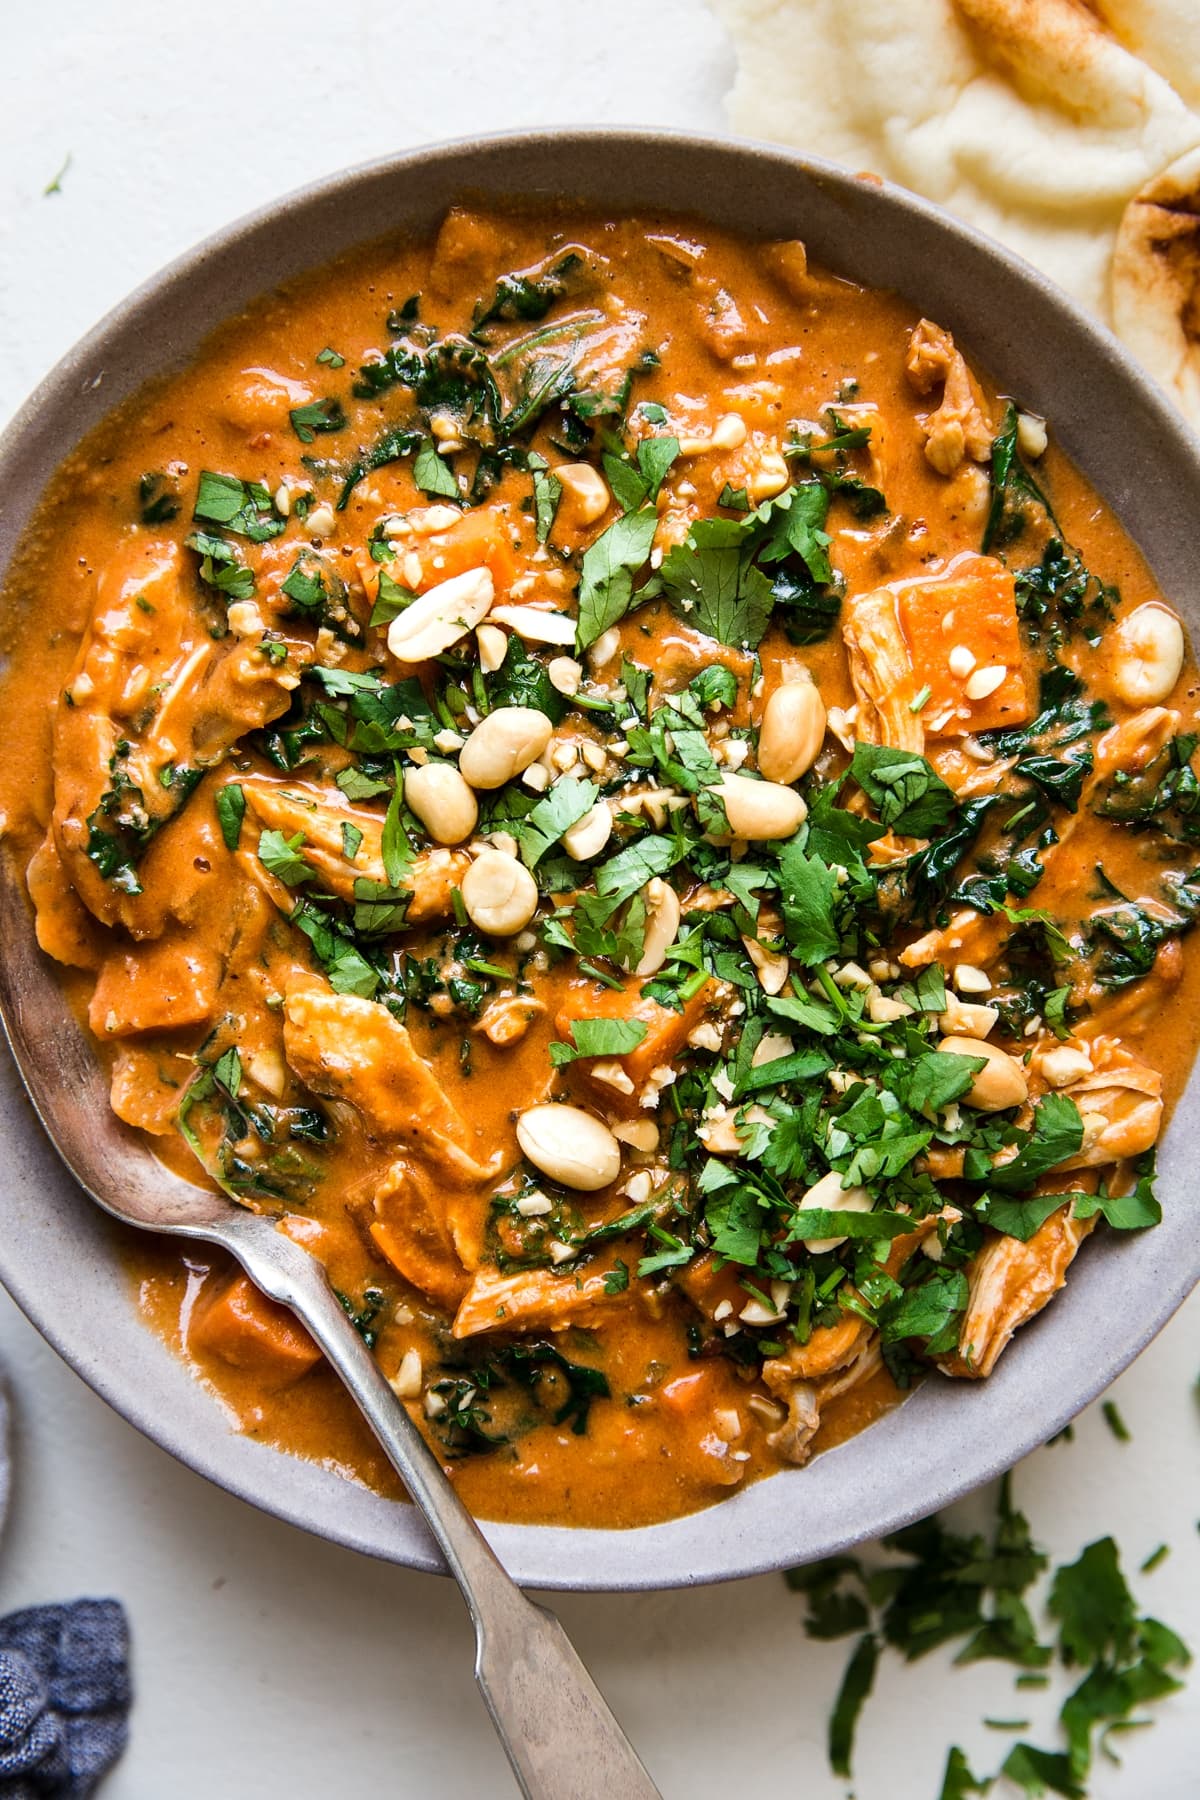 African Peanut Soup with kale and chicken in a bowl with a spoon